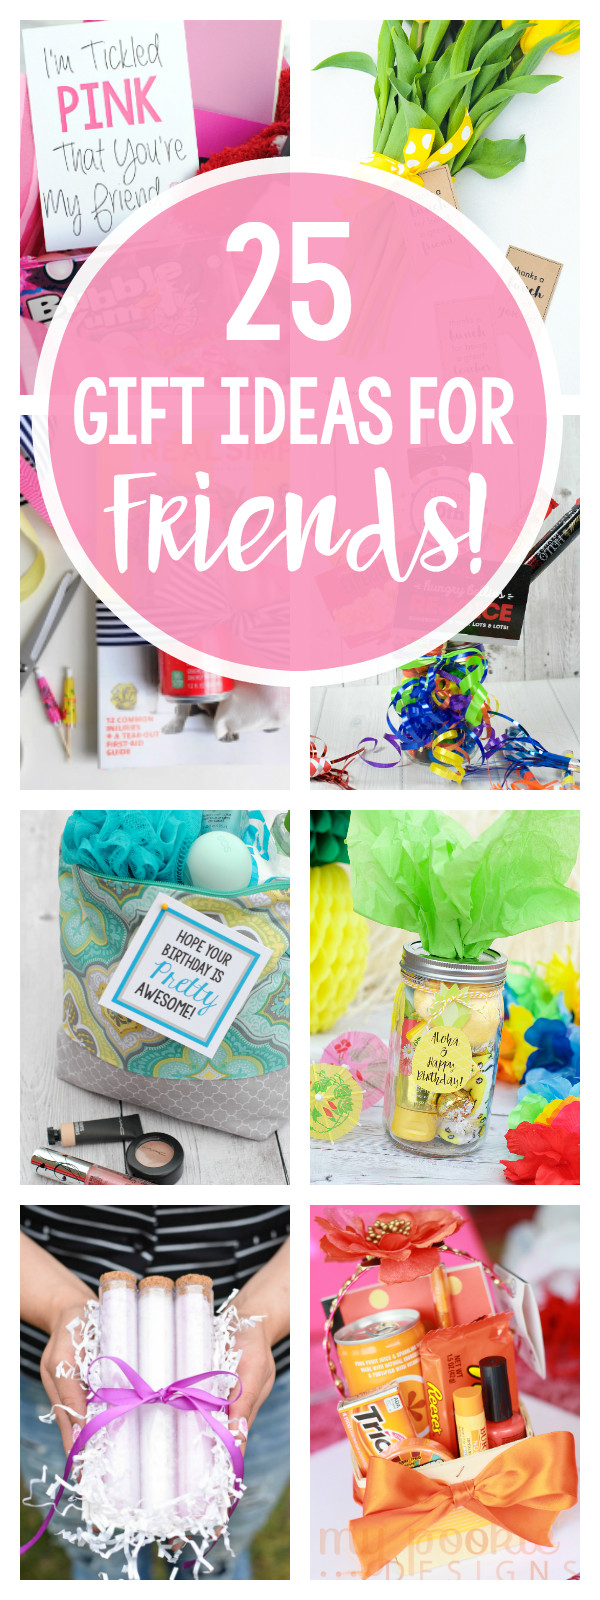 Anniversary Gift Ideas For Friend
 25 Fun Gifts for Best Friends for Any Occasion – Fun Squared